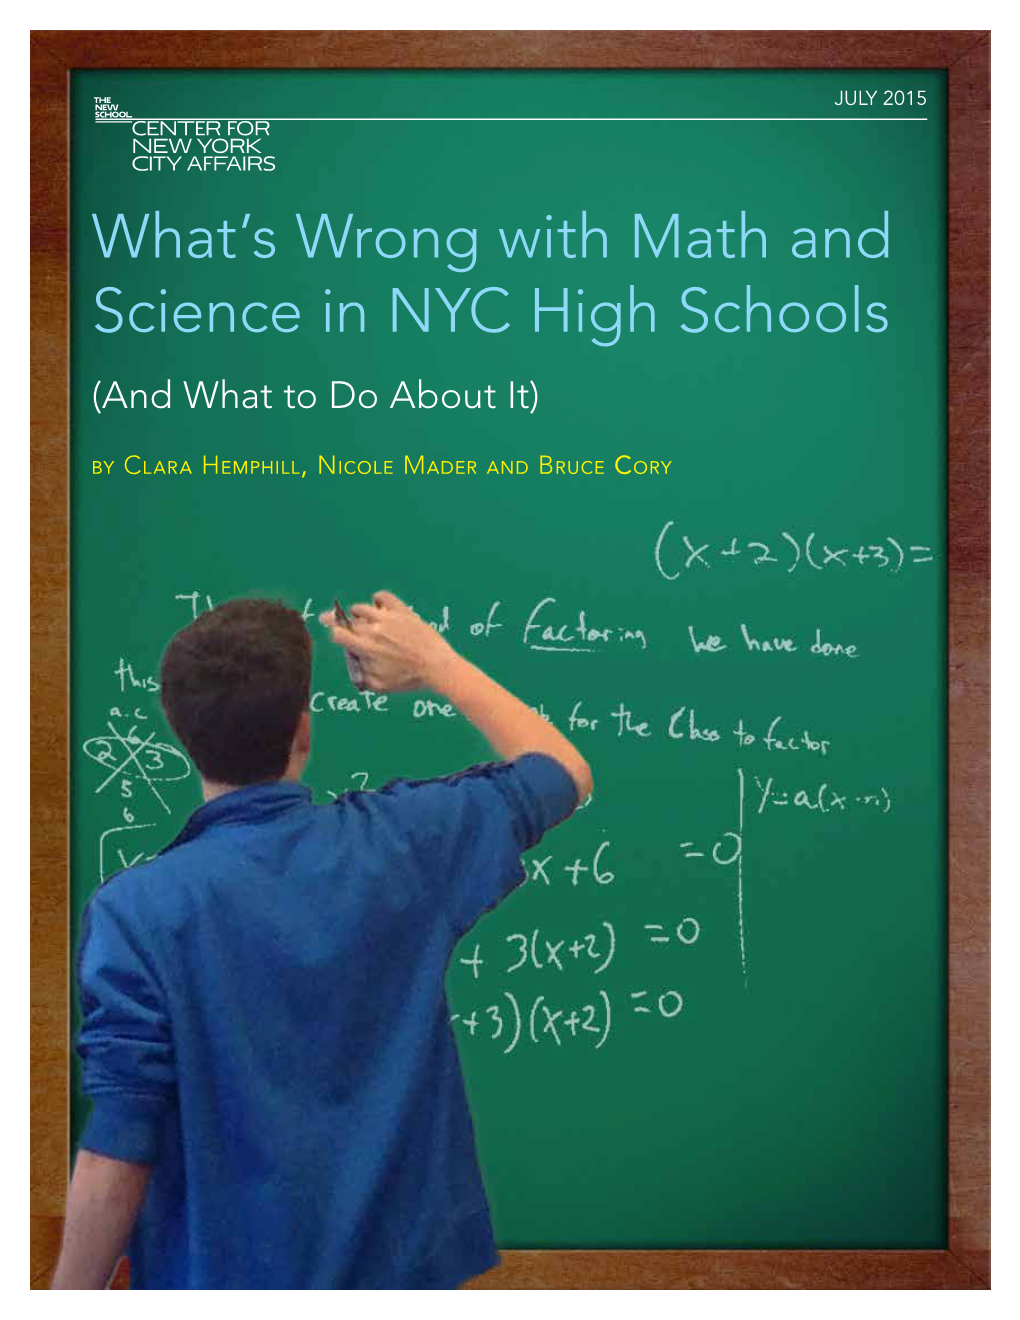 What's Wrong with Math and Science in NYC High Schools